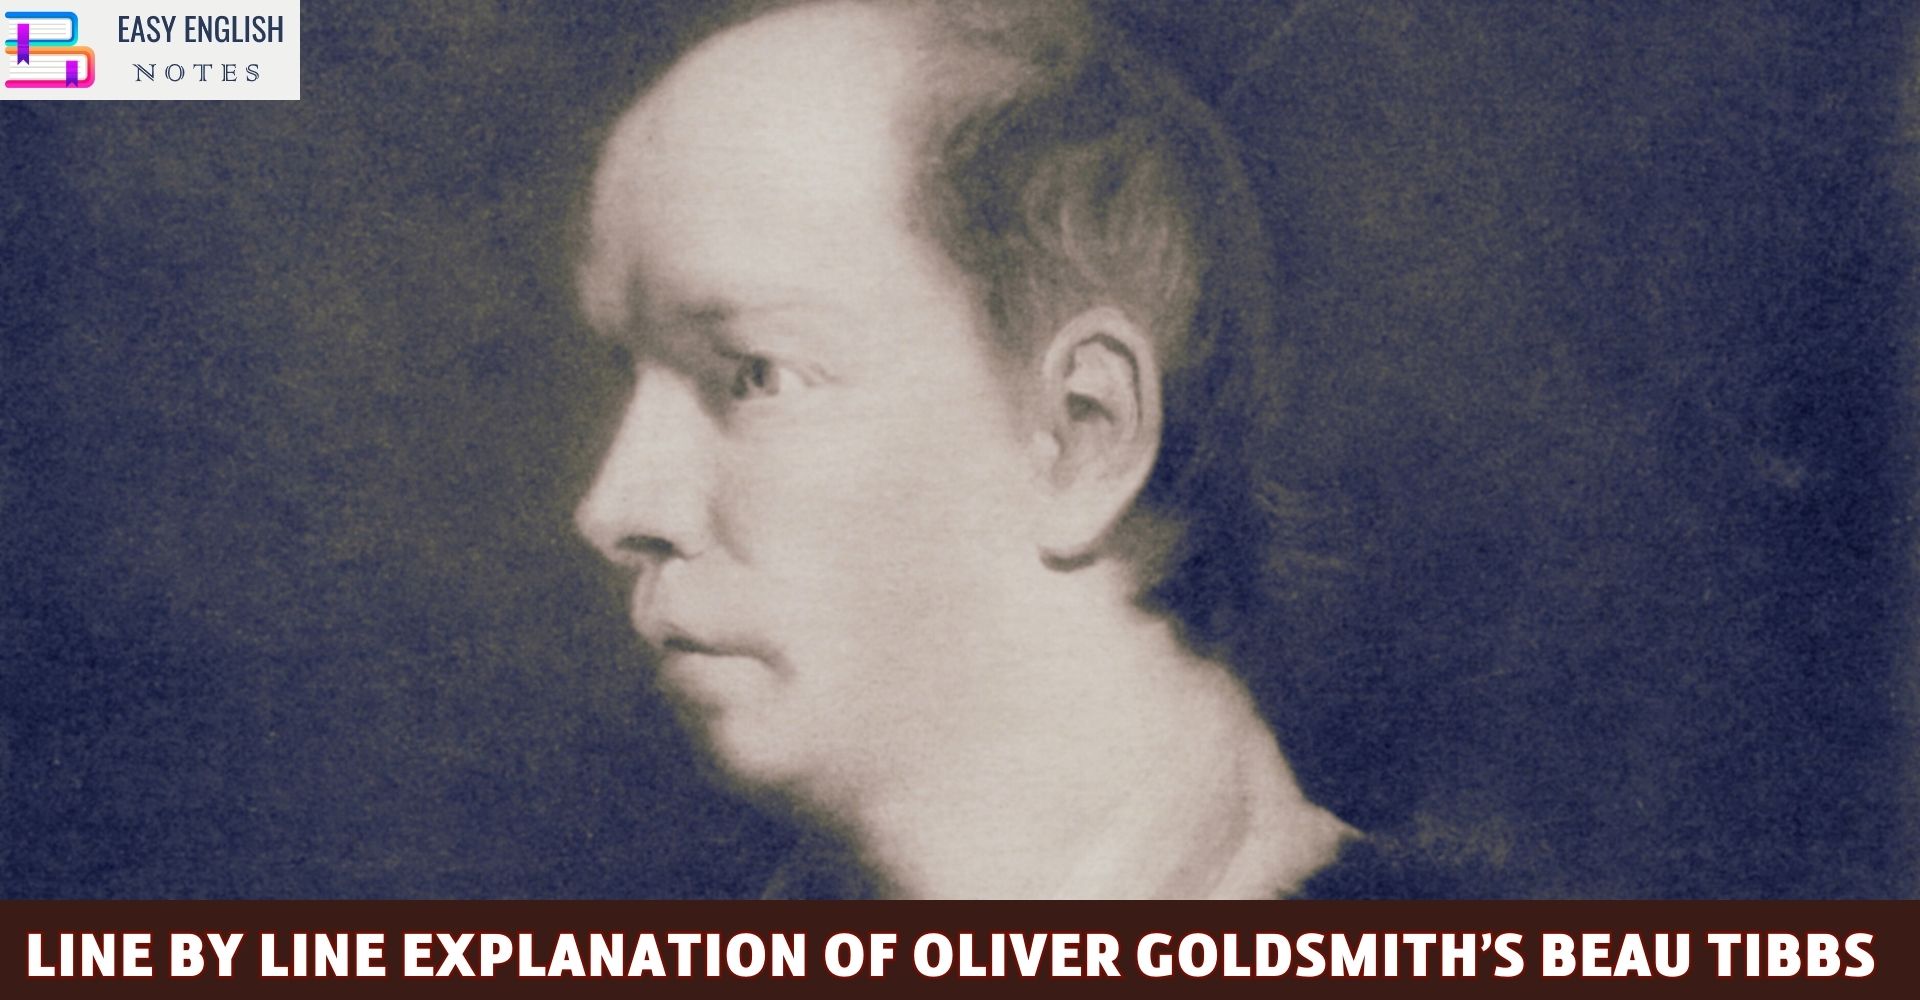 Line By Line Explanation Of Oliver Goldsmith’s Beau Tibbs